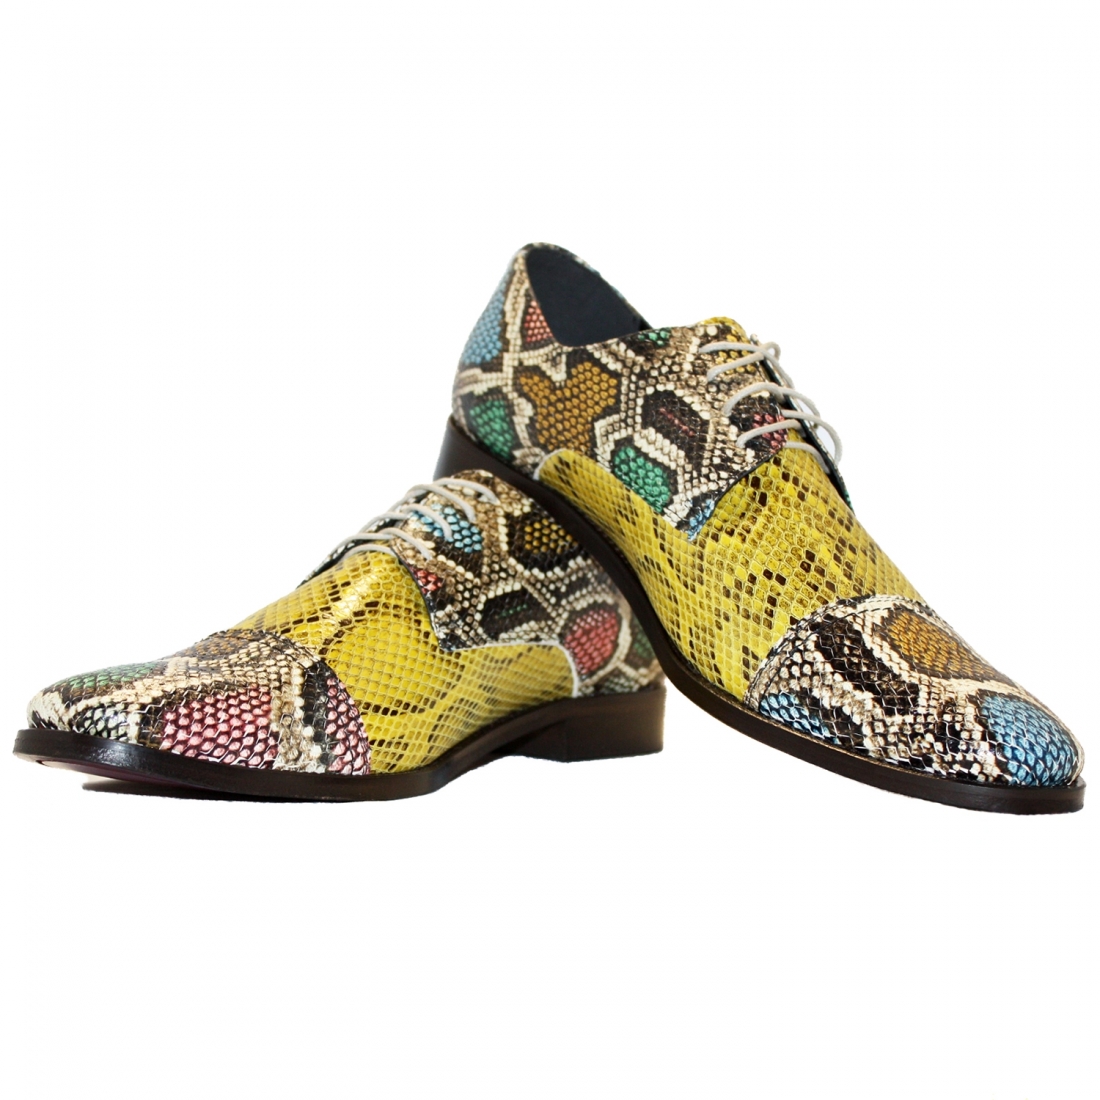 copy of Modello Arosso - Chaussure Classique - Handmade Colorful Italian Leather Shoes